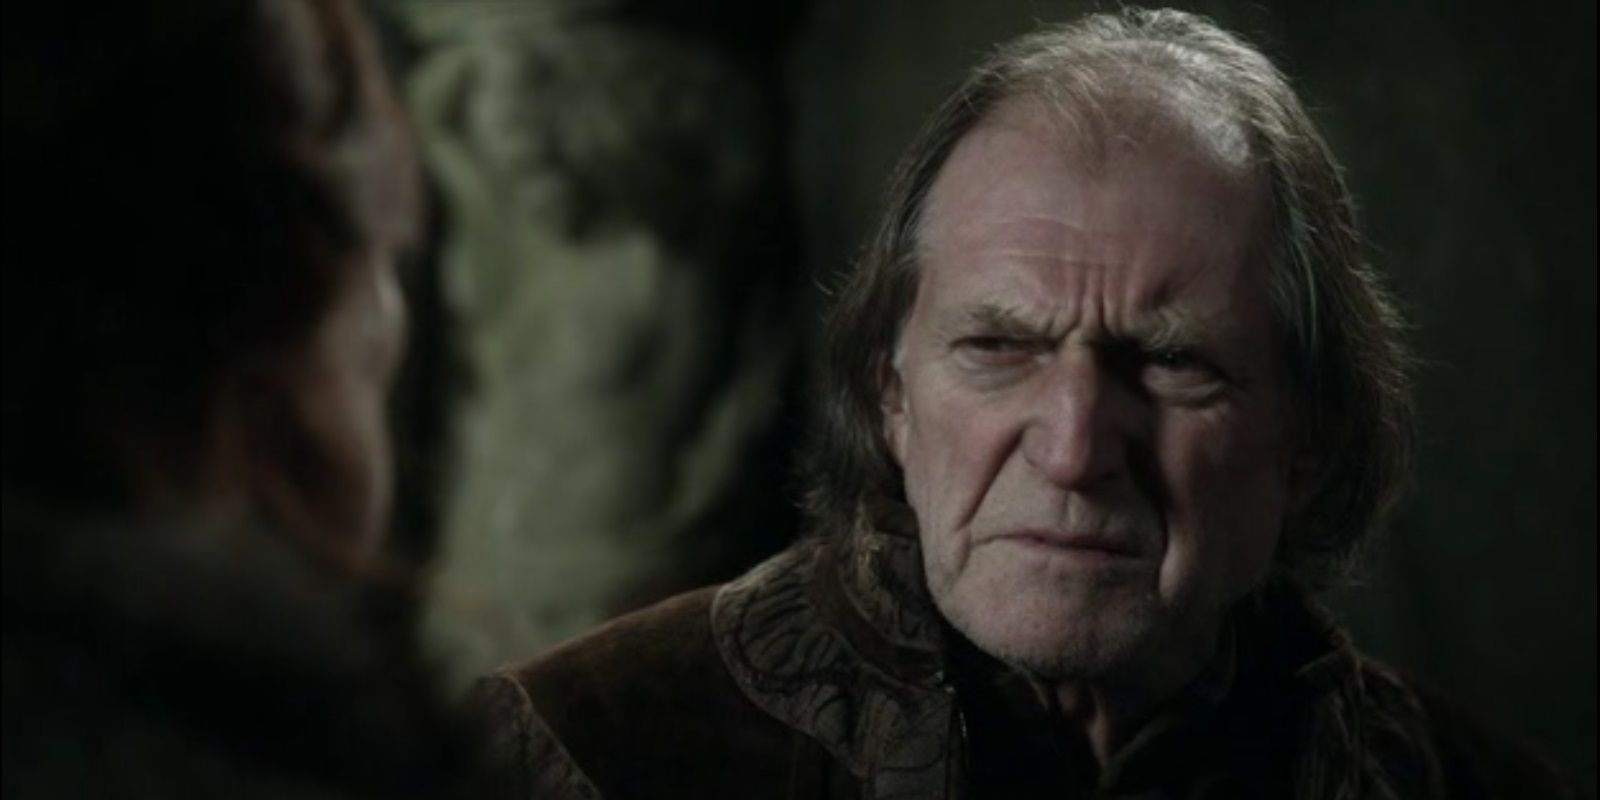 Lord Walder Frey played by David Bradley at the Twins on Game of Thrones